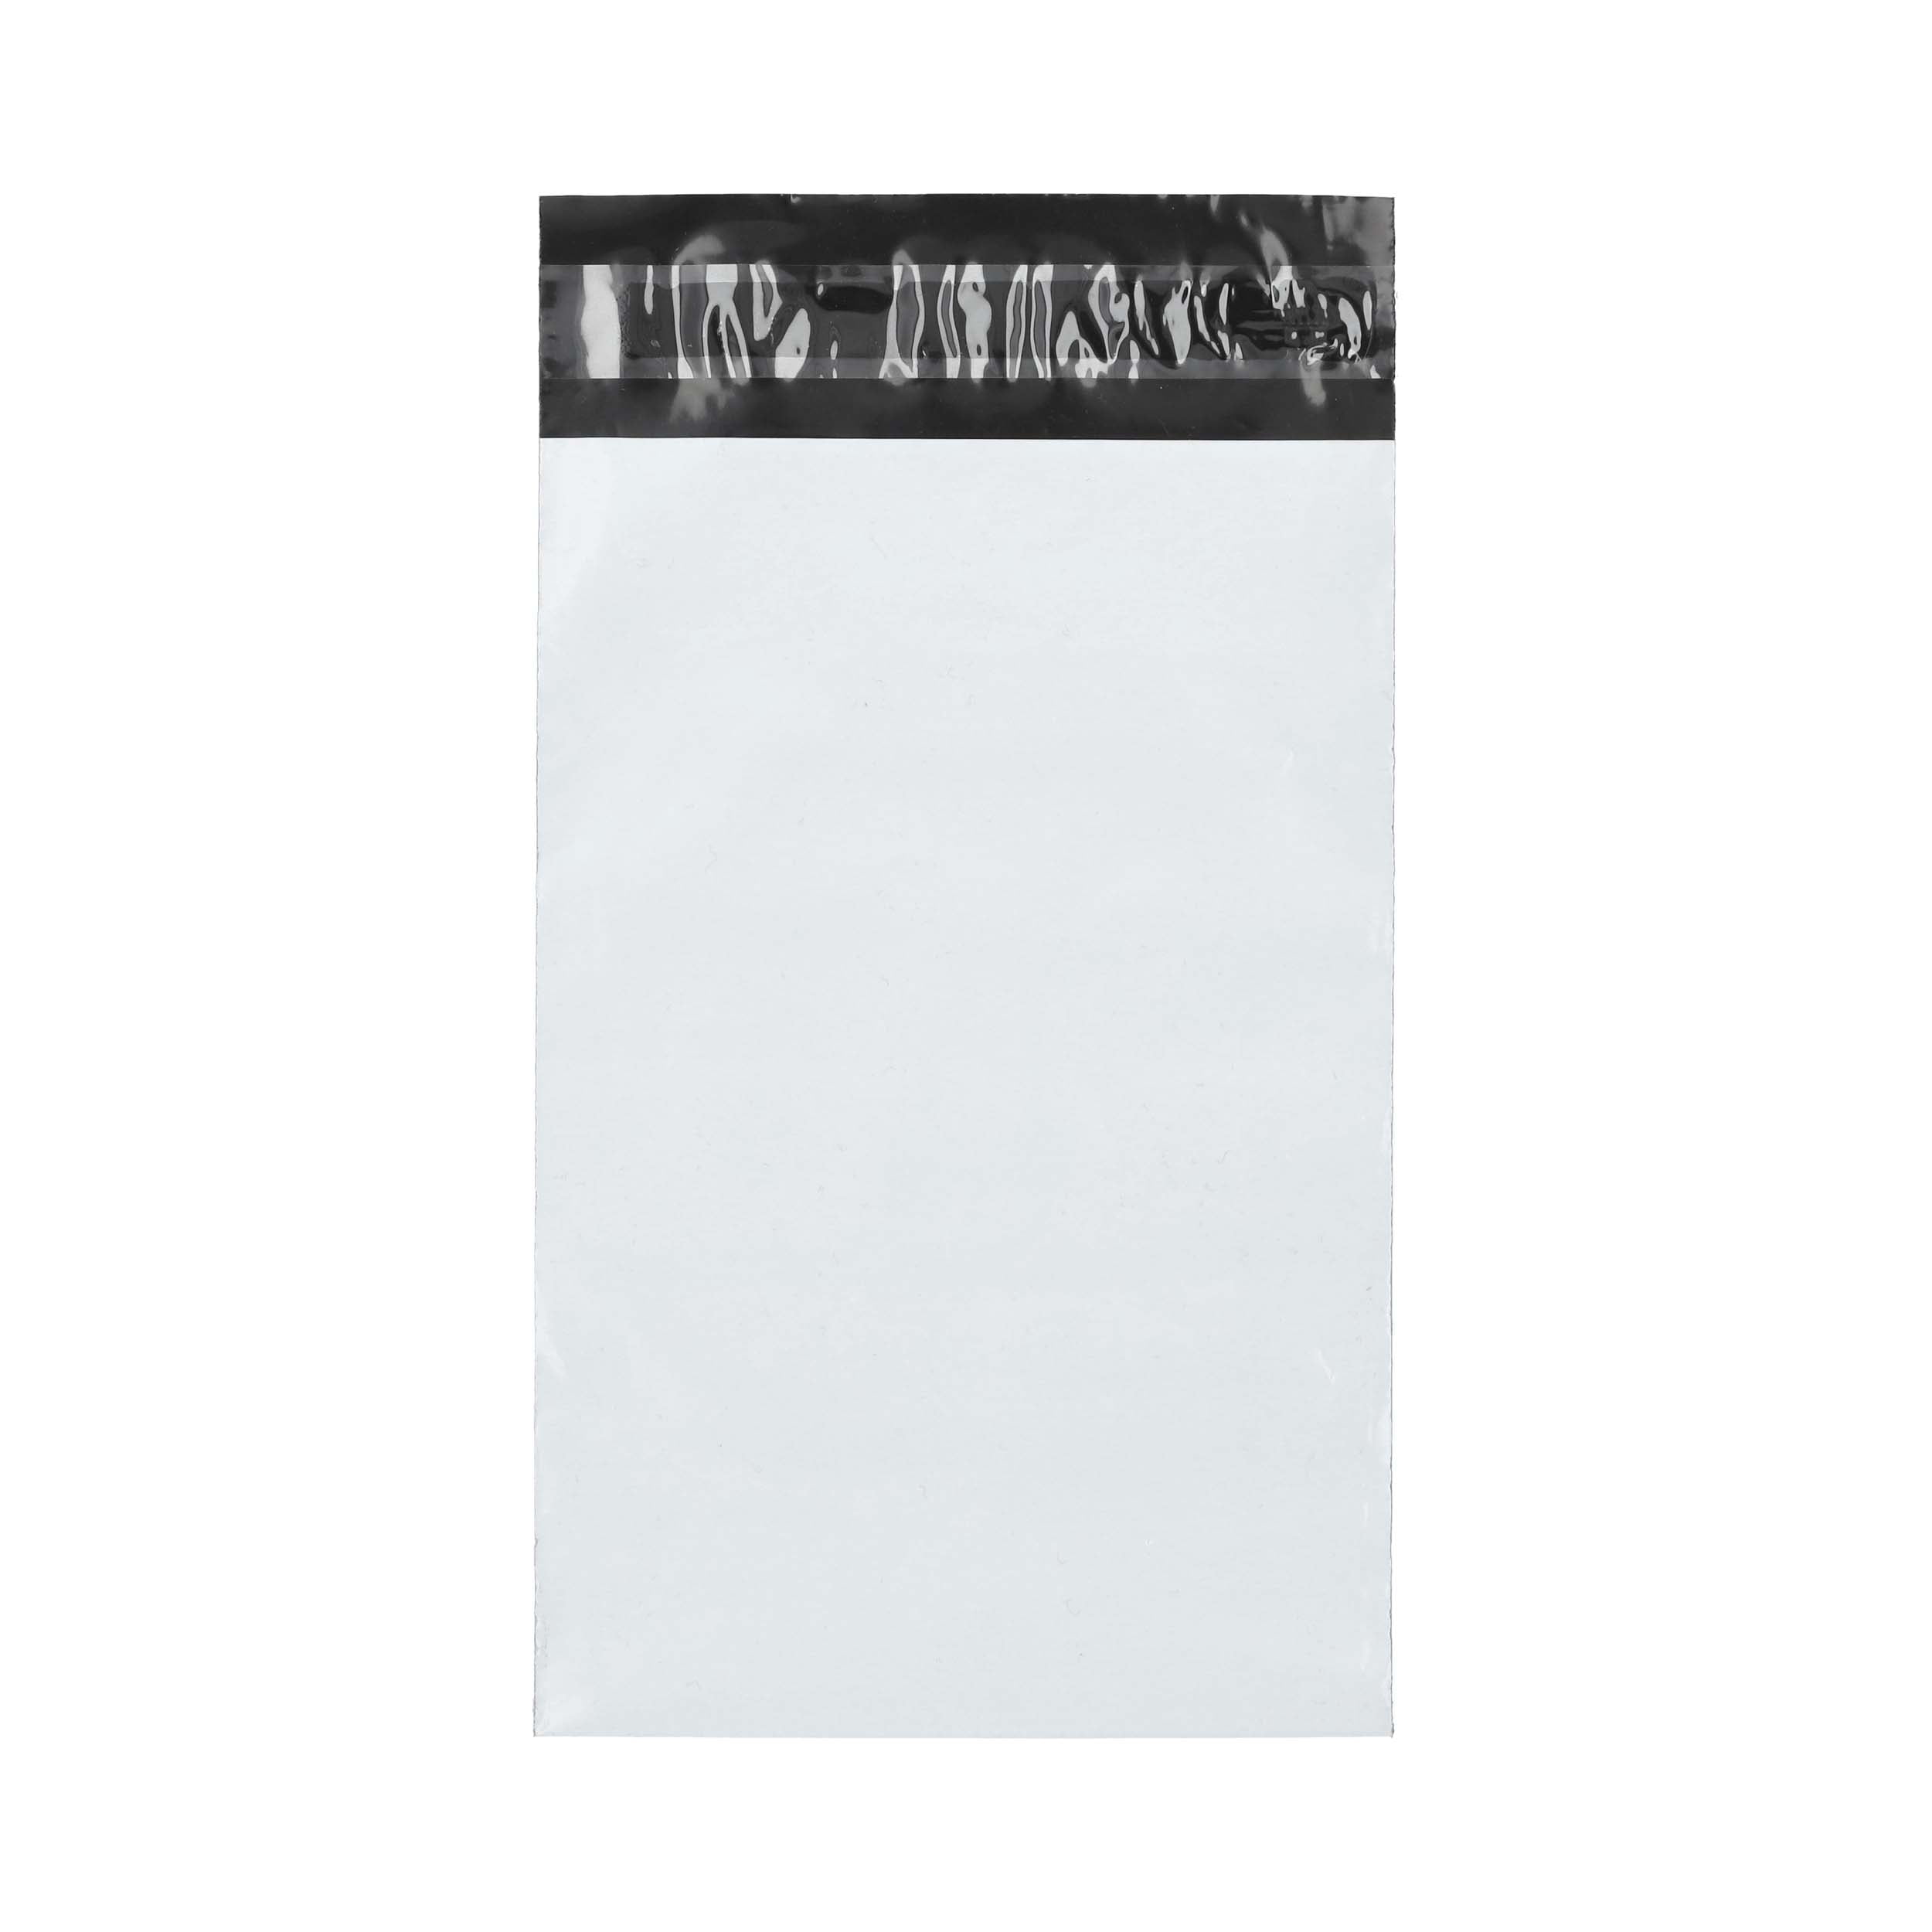 5 12x15.5 WHITE POLY MAILERS SHIPPING ENVELOPES BAGS 